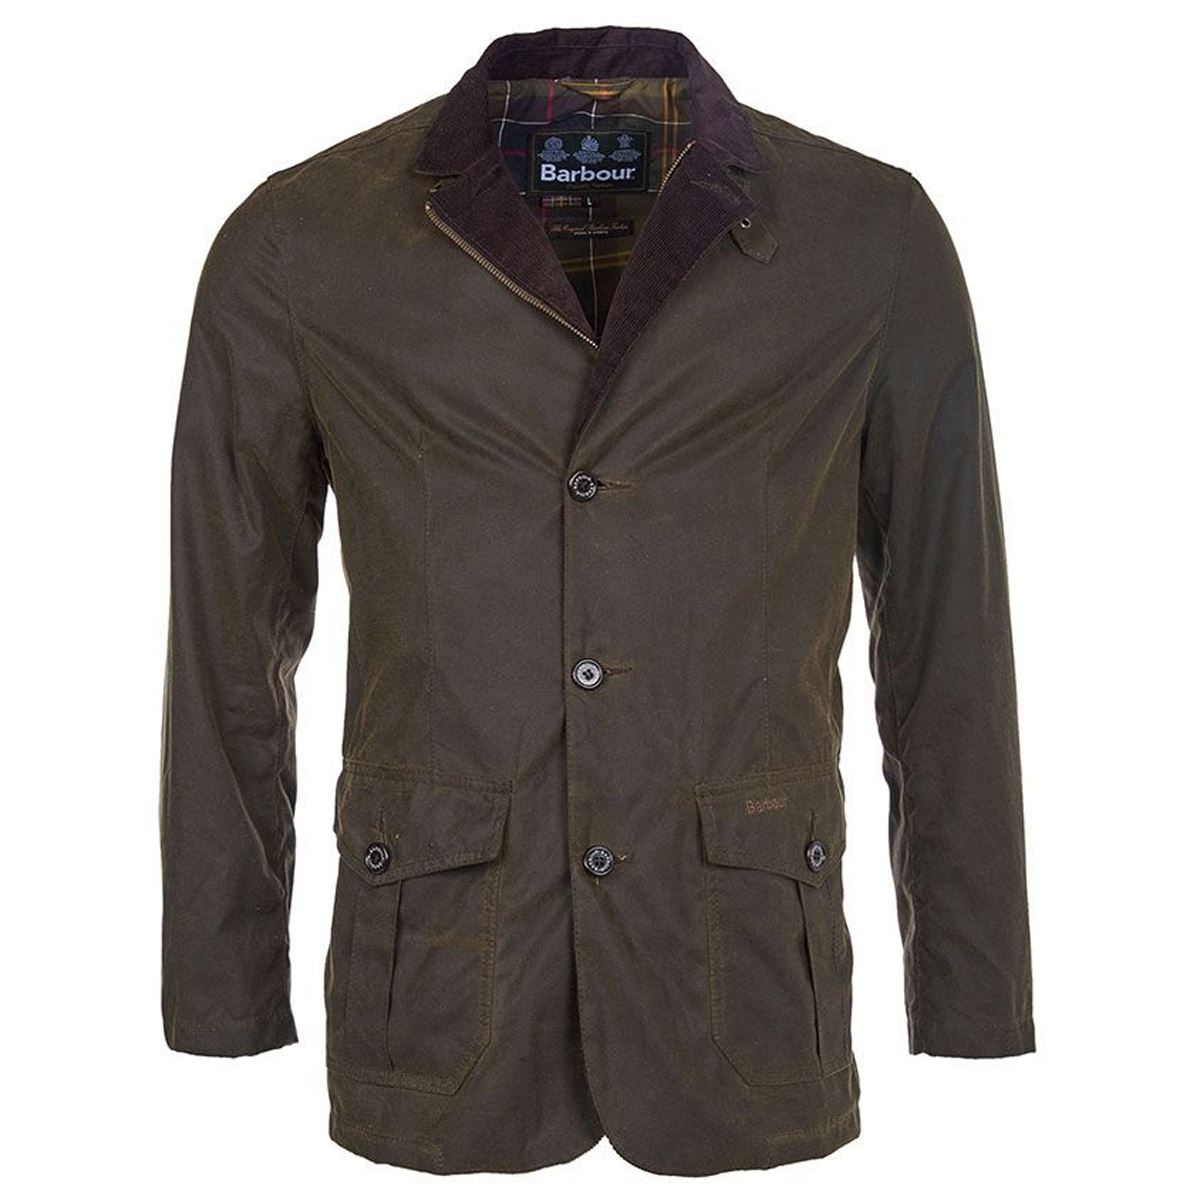 What materials make up the Barbour Lutz Wax Jacket?